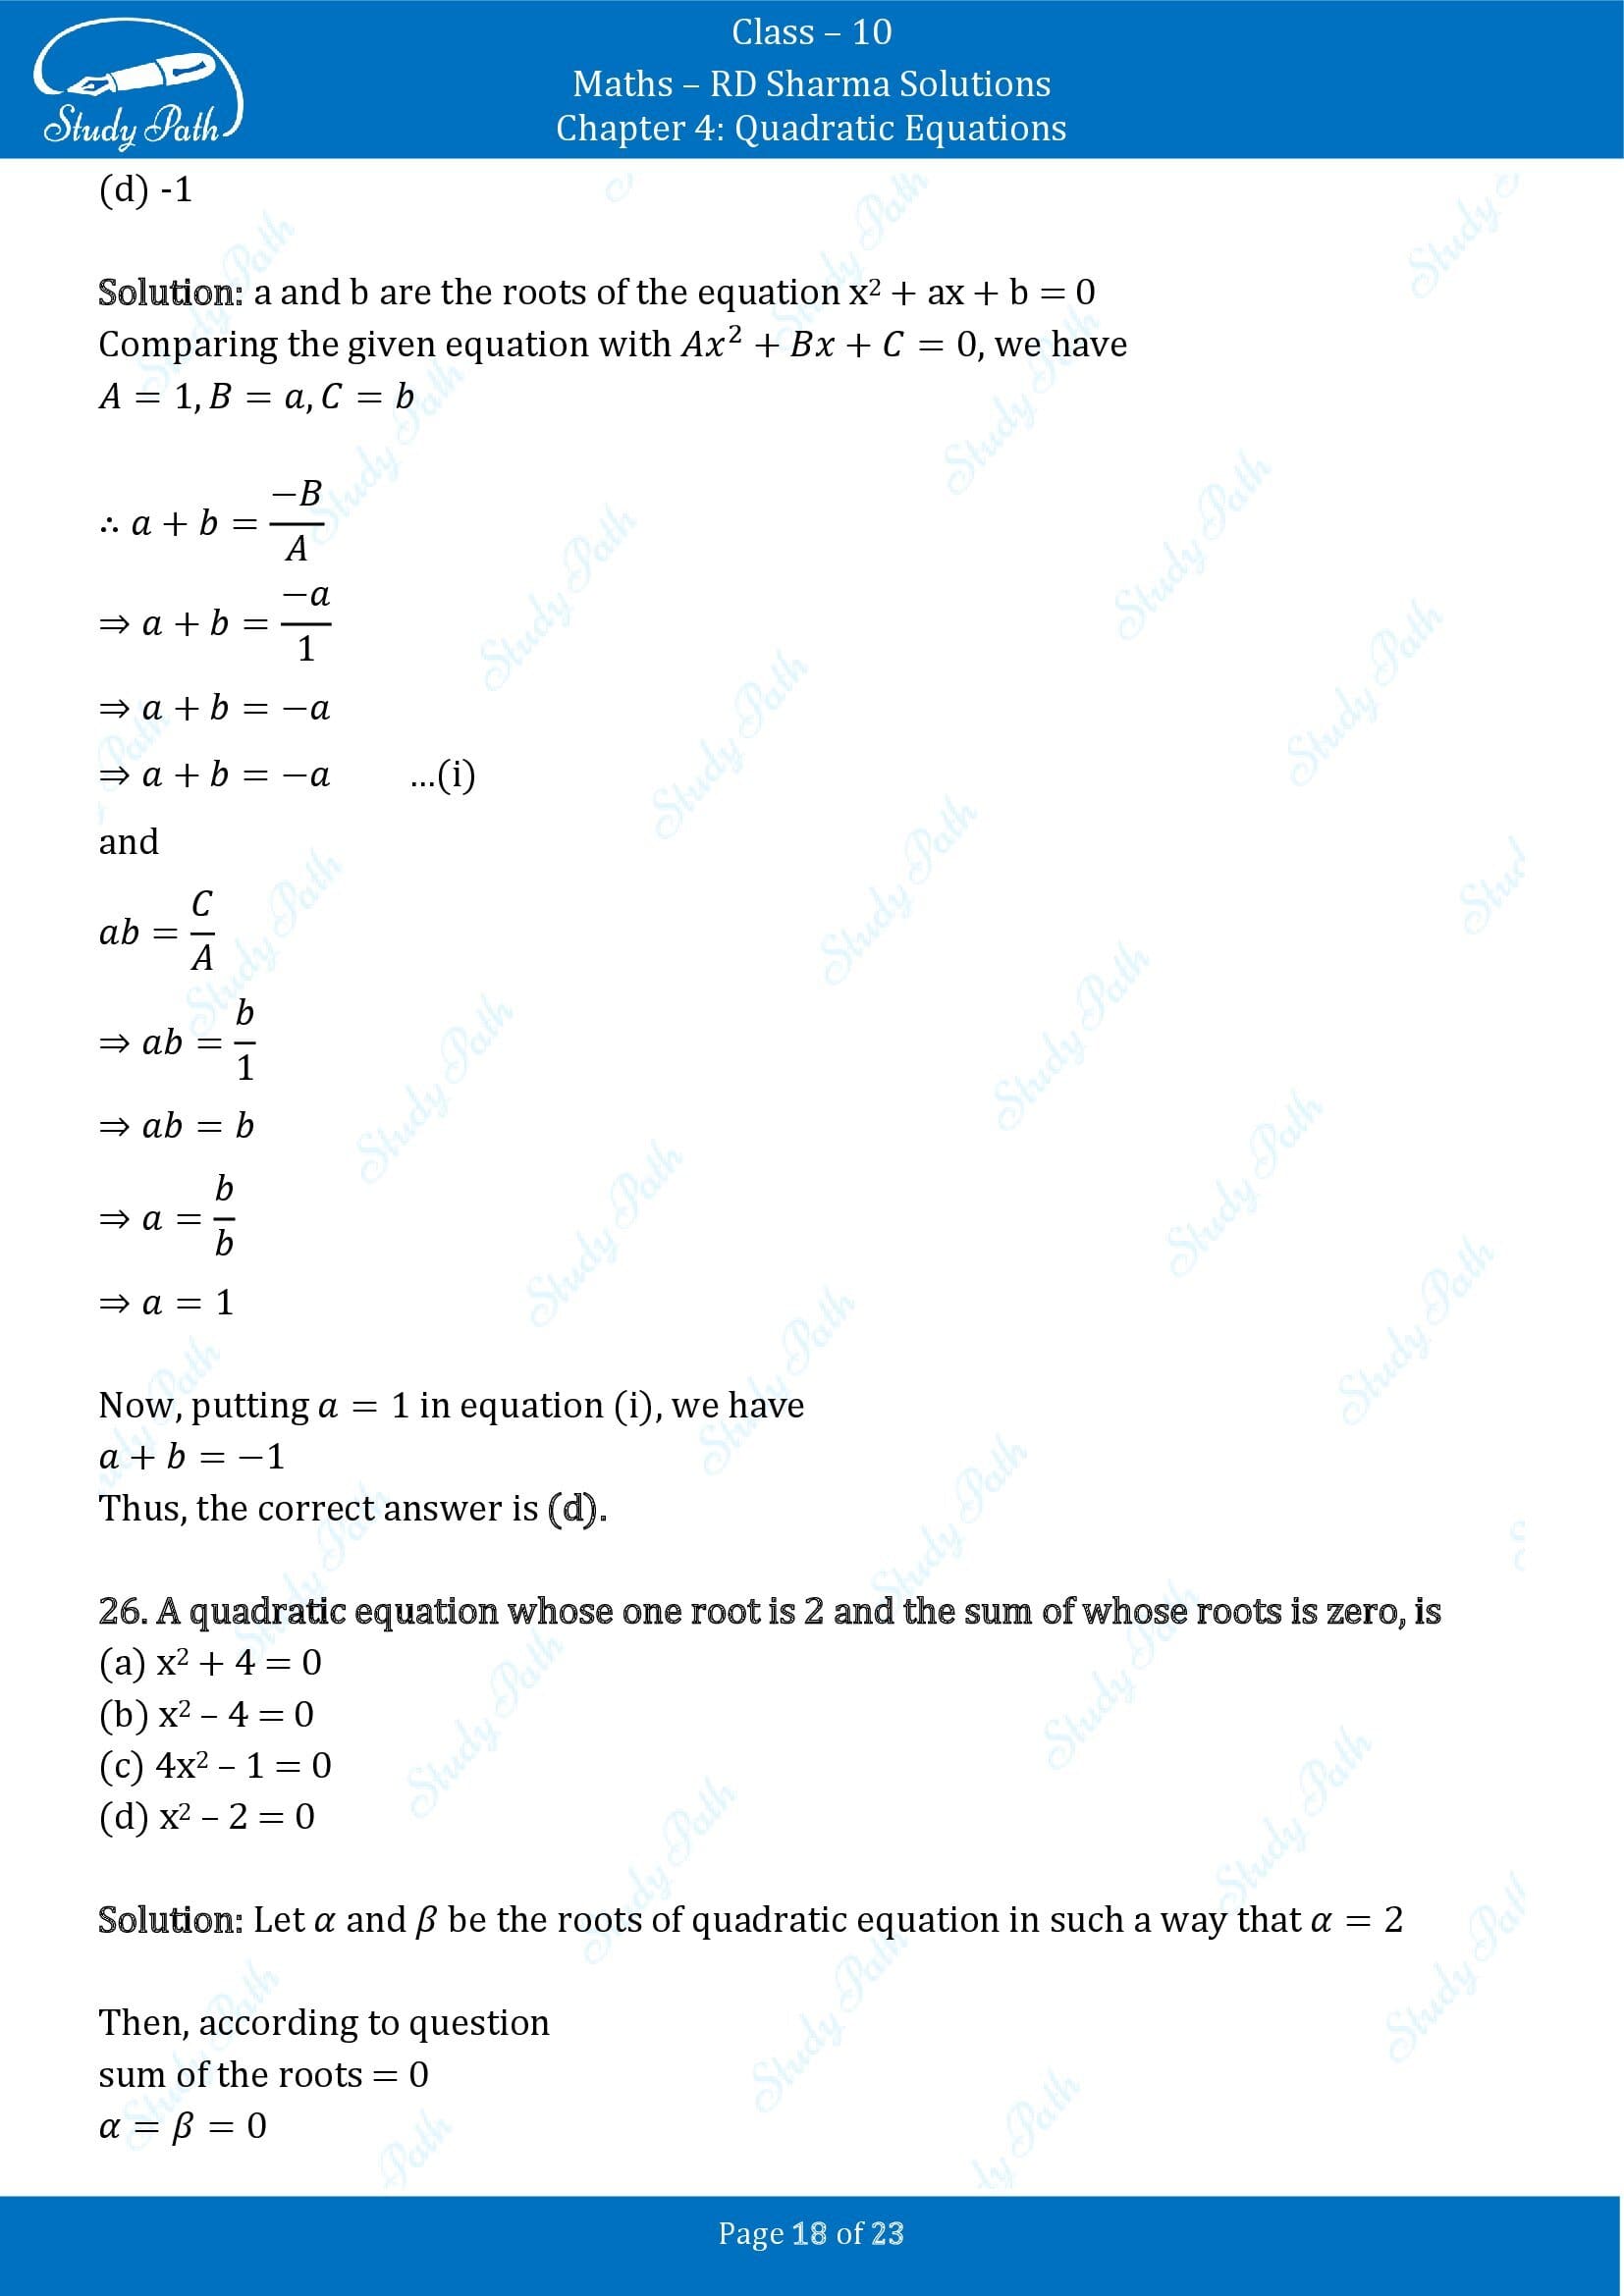 RD Sharma Solutions Class 10 Chapter 4 Quadratic Equations Multiple Choice Questions MCQs 00018